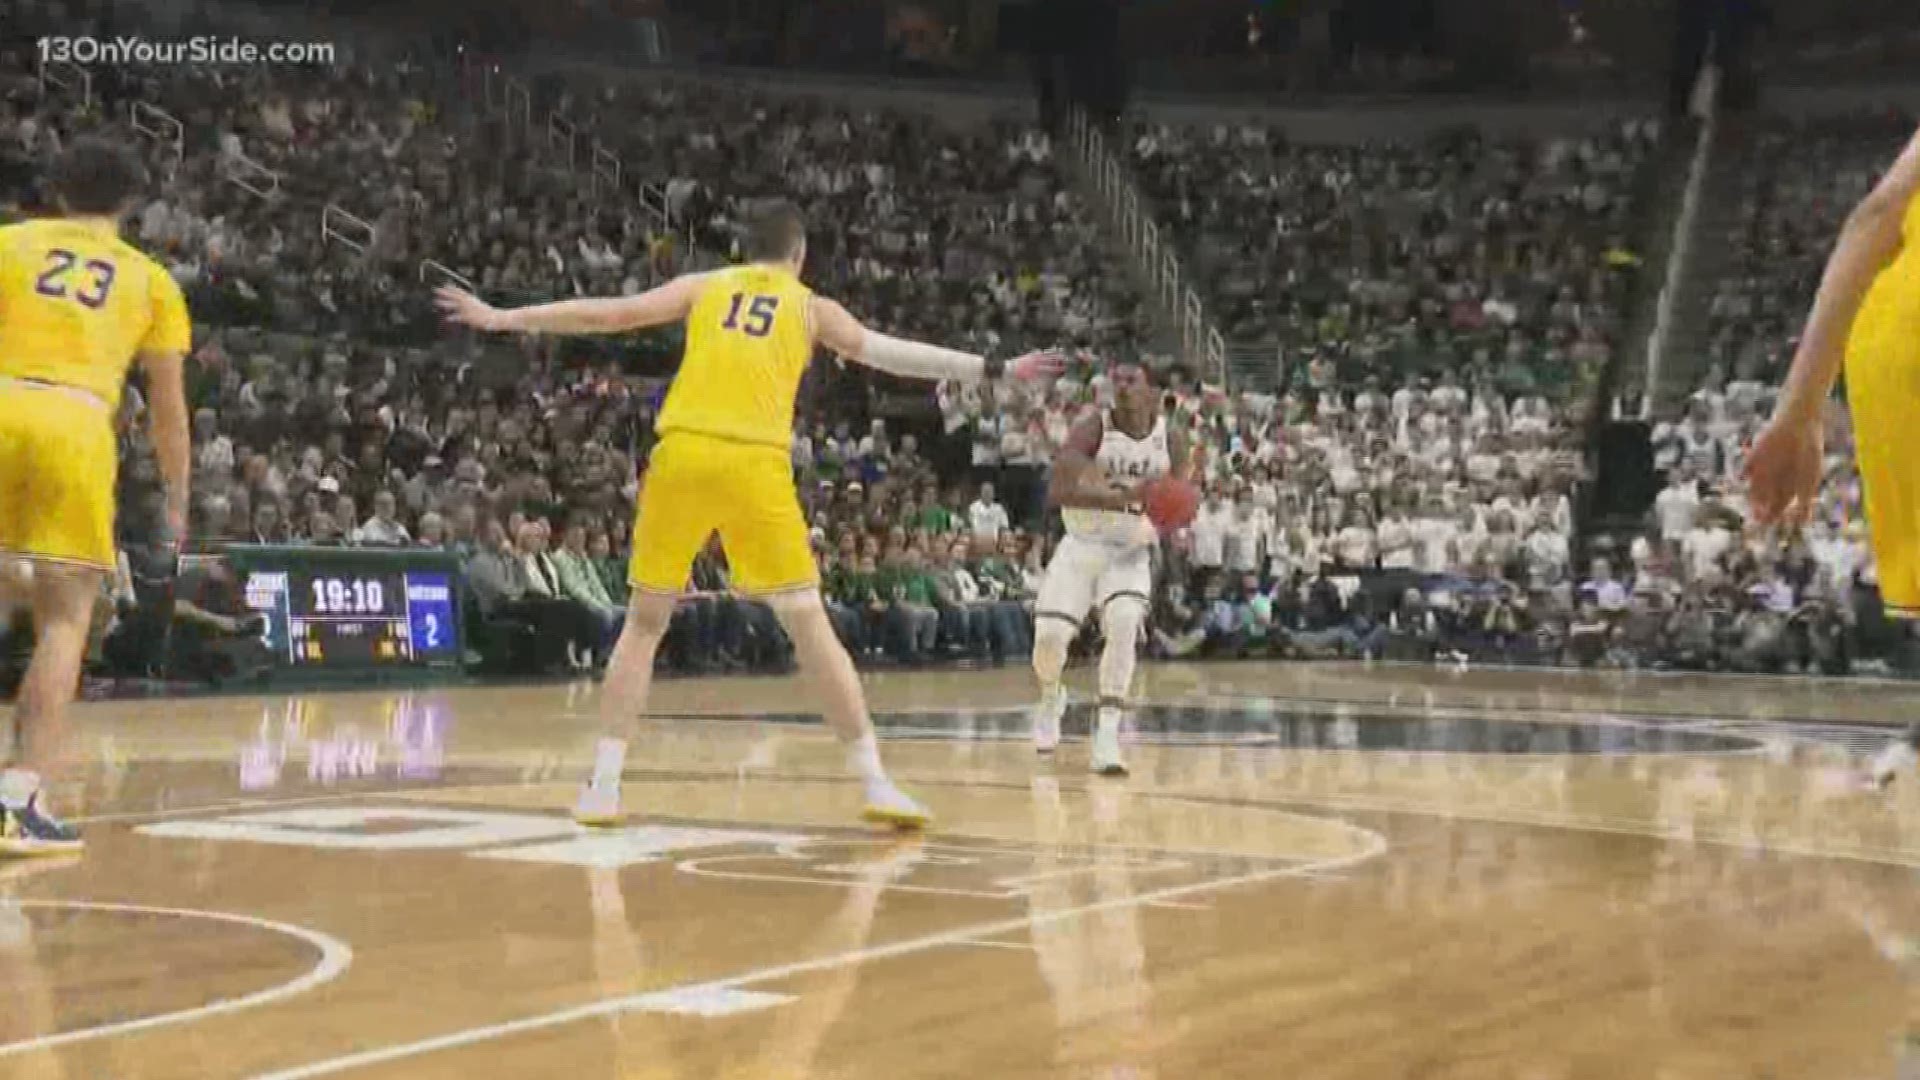 Right now, Michigan State is in a groove.